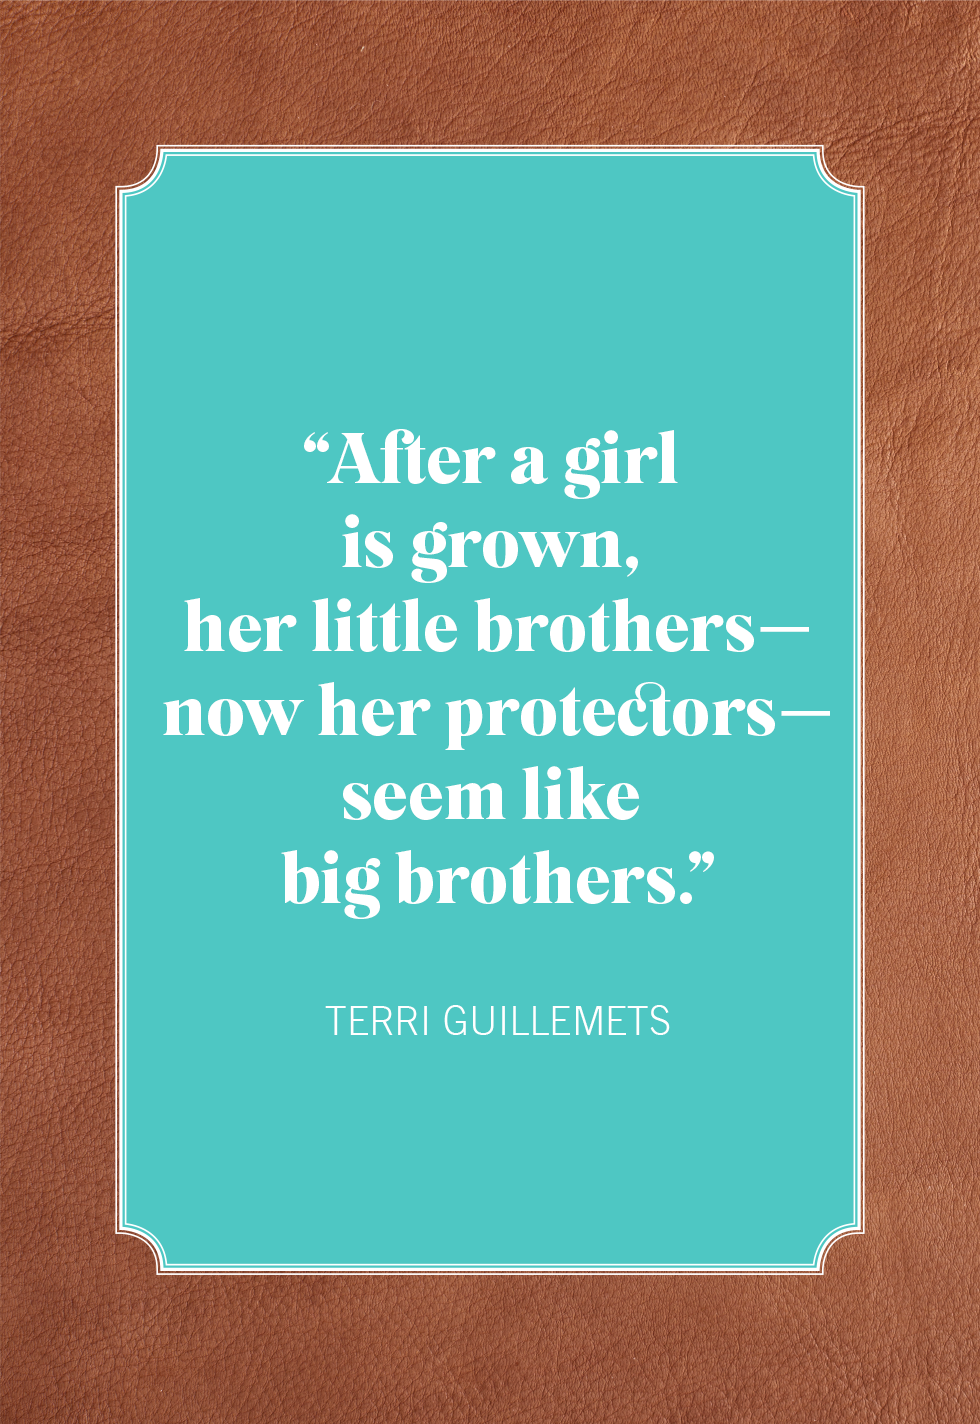 20 Best Brother Quotes - Funny, Heartfelt Quotes About Brothers